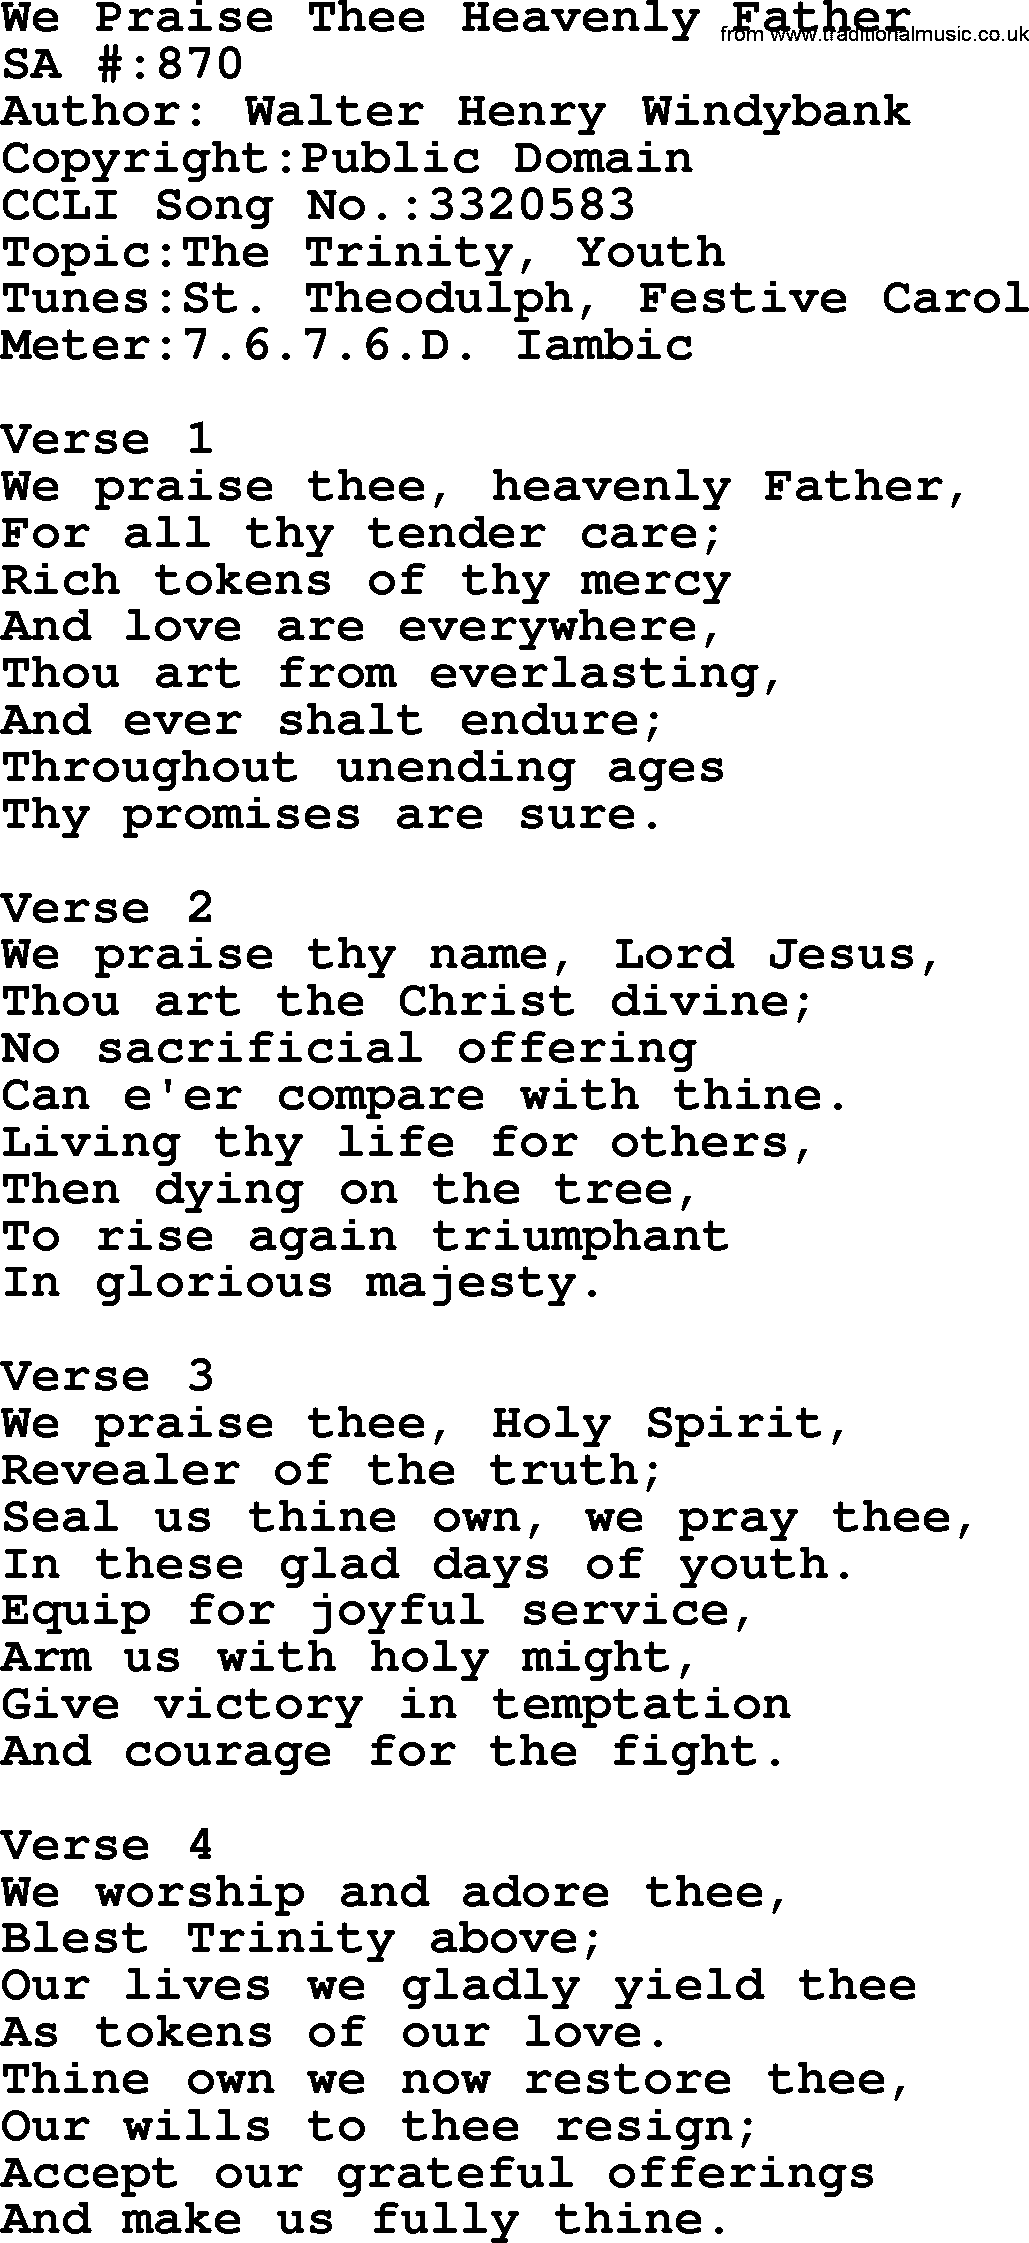 Salvation Army Hymnal, title: We Praise Thee Heavenly Father, with lyrics and PDF,